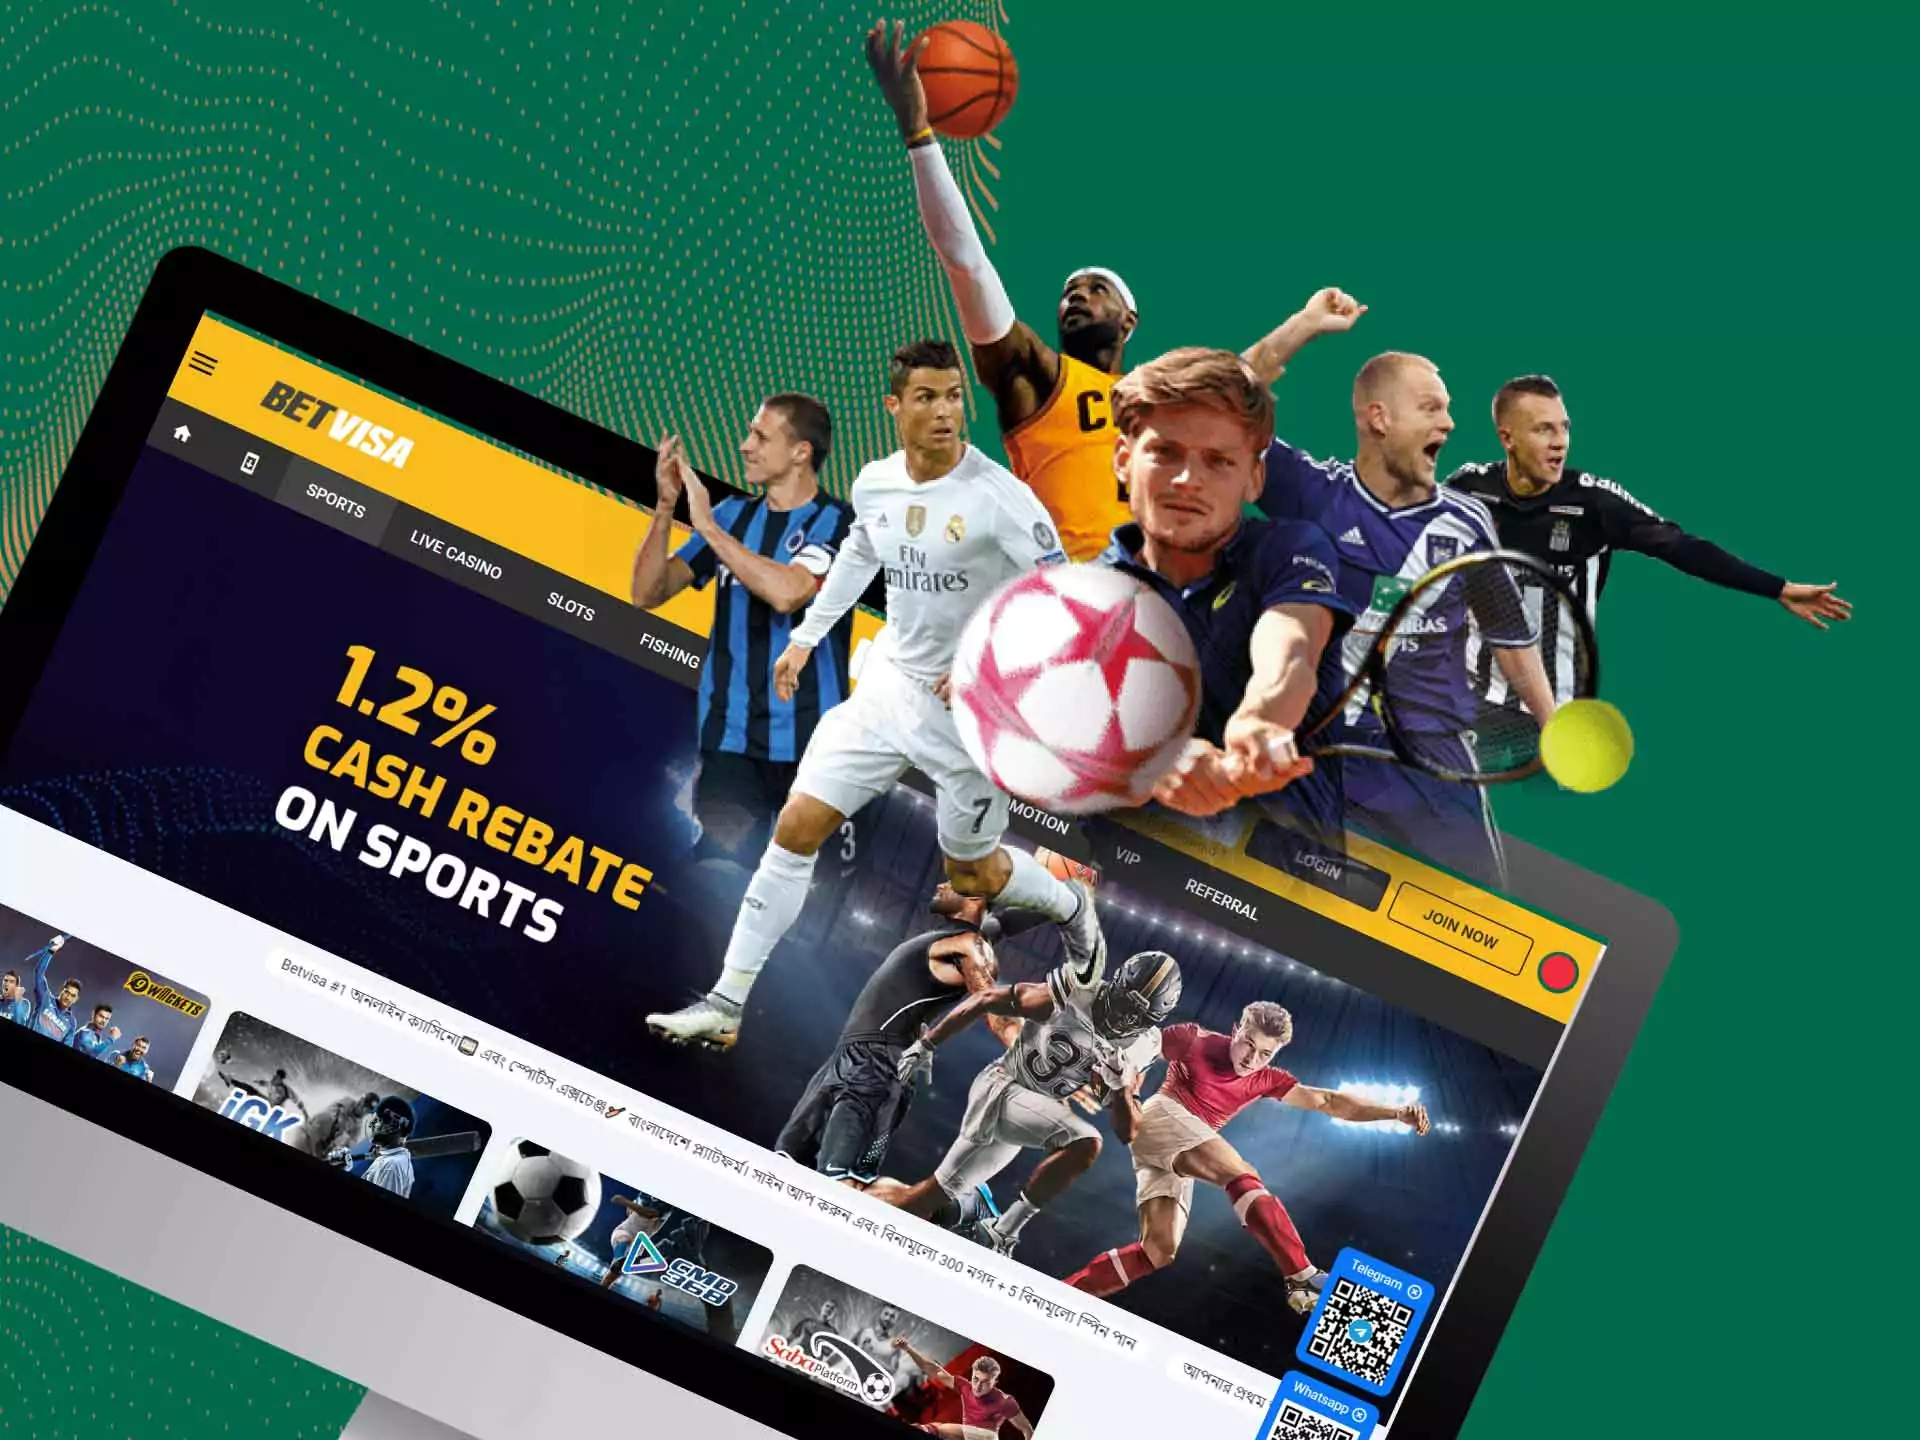 There are many different markets on various sports in the BetVisa sportsbook.